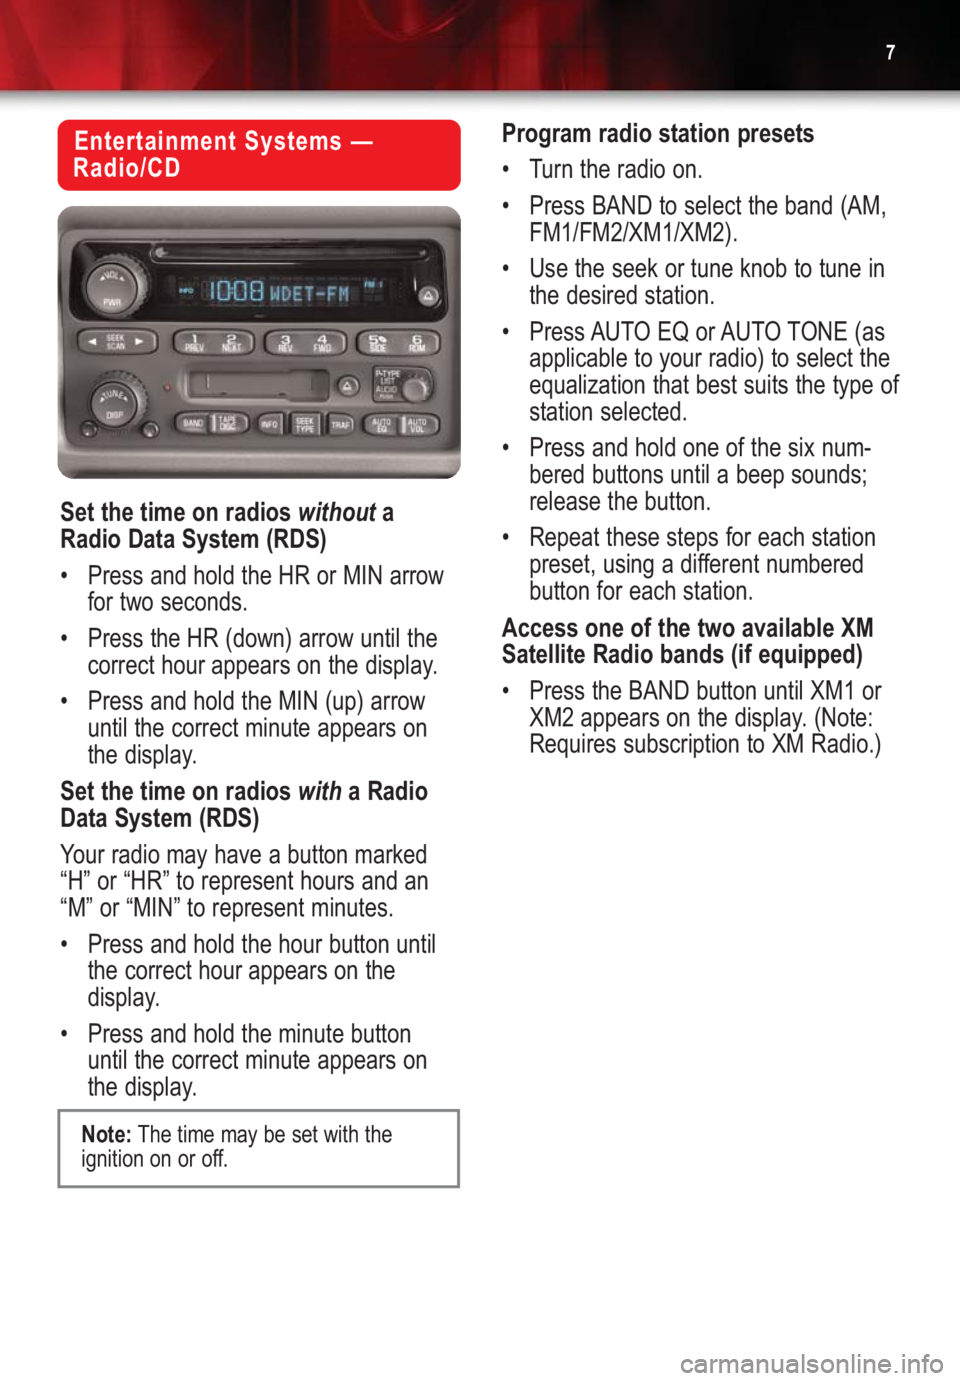 GMC YUKON 2004  Get To Know Guide 7
Entertainment Systems —
Radio/CD
Set the time on radios withouta
Radio Data System (RDS)
•Press and hold the HR or MIN arrow
for two seconds.
•Press the HR (down) arrow until the
correct hour 